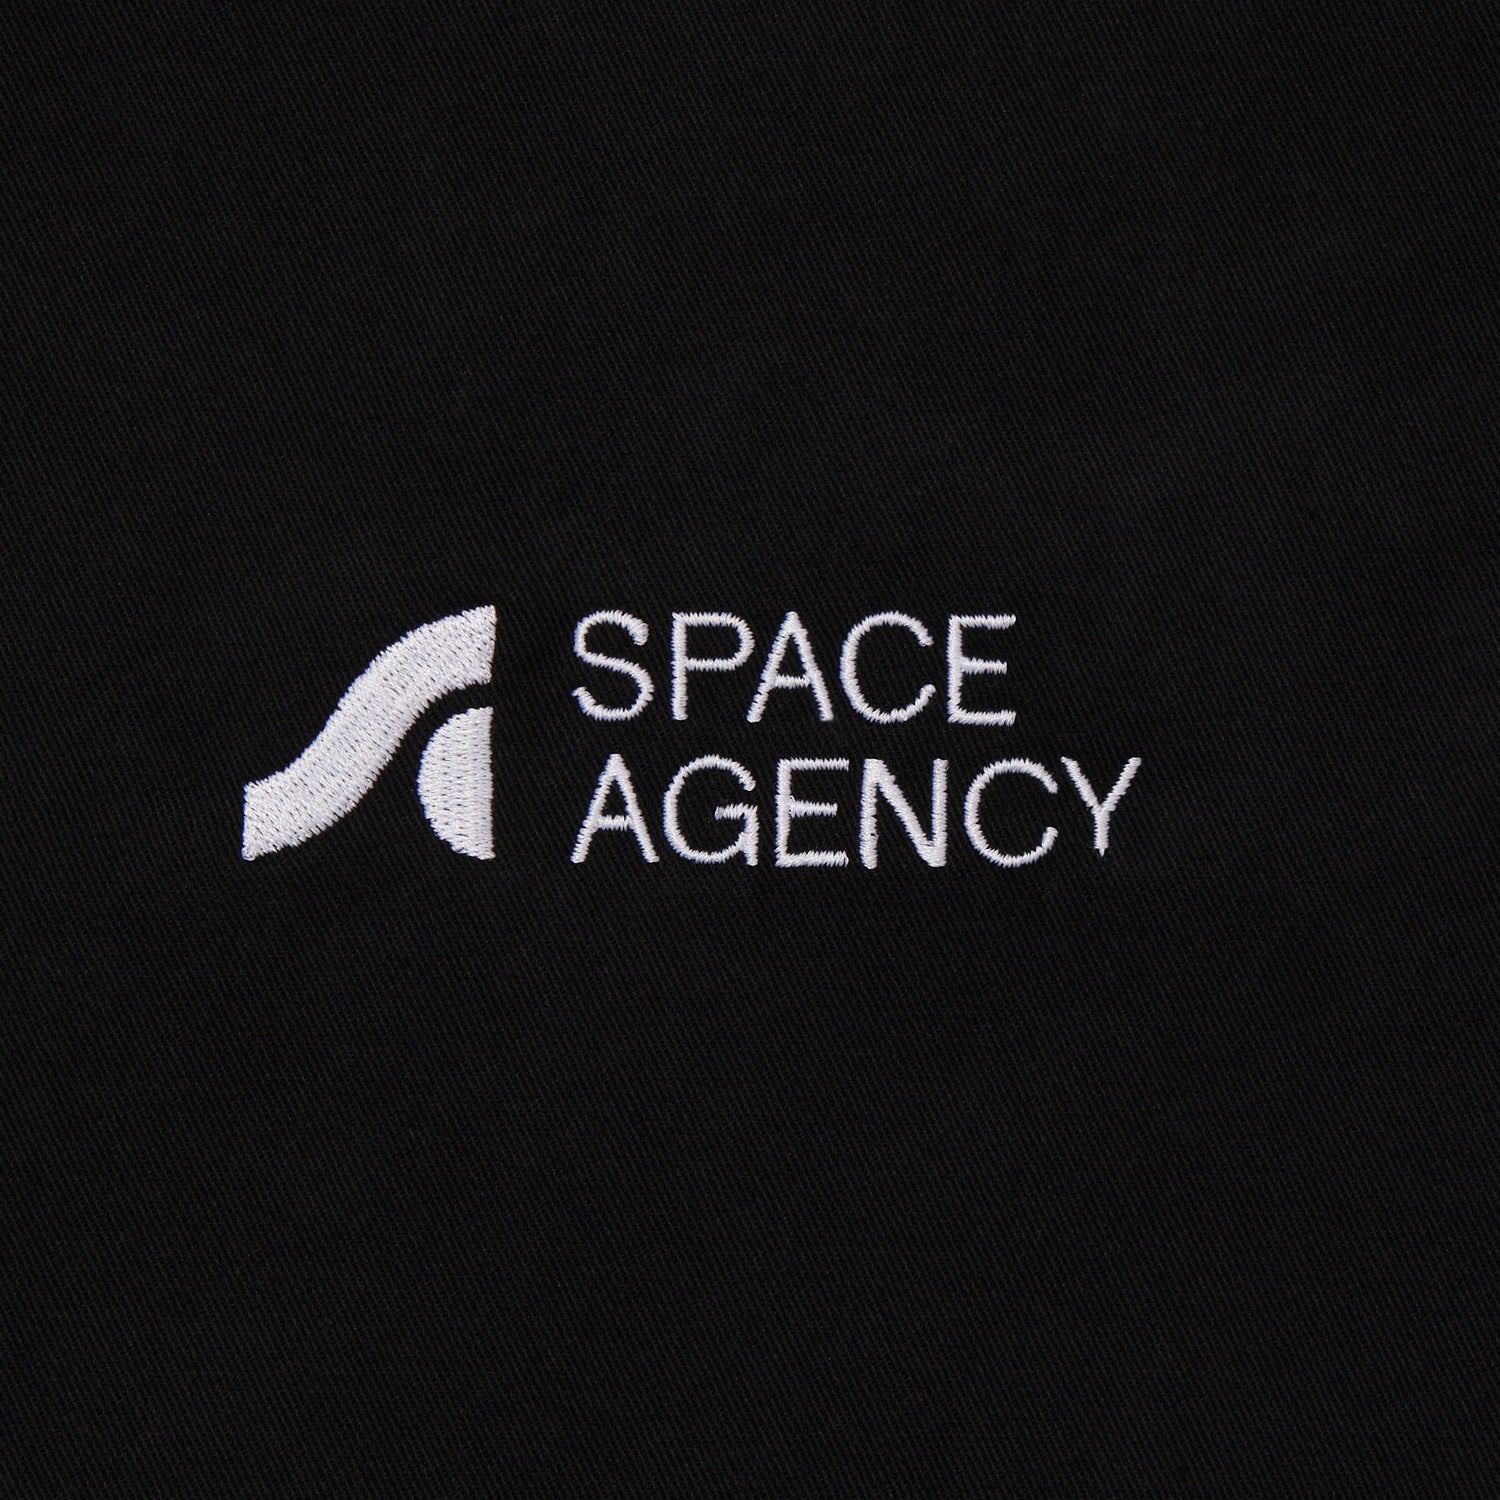 SPACE AGENCY TOTE